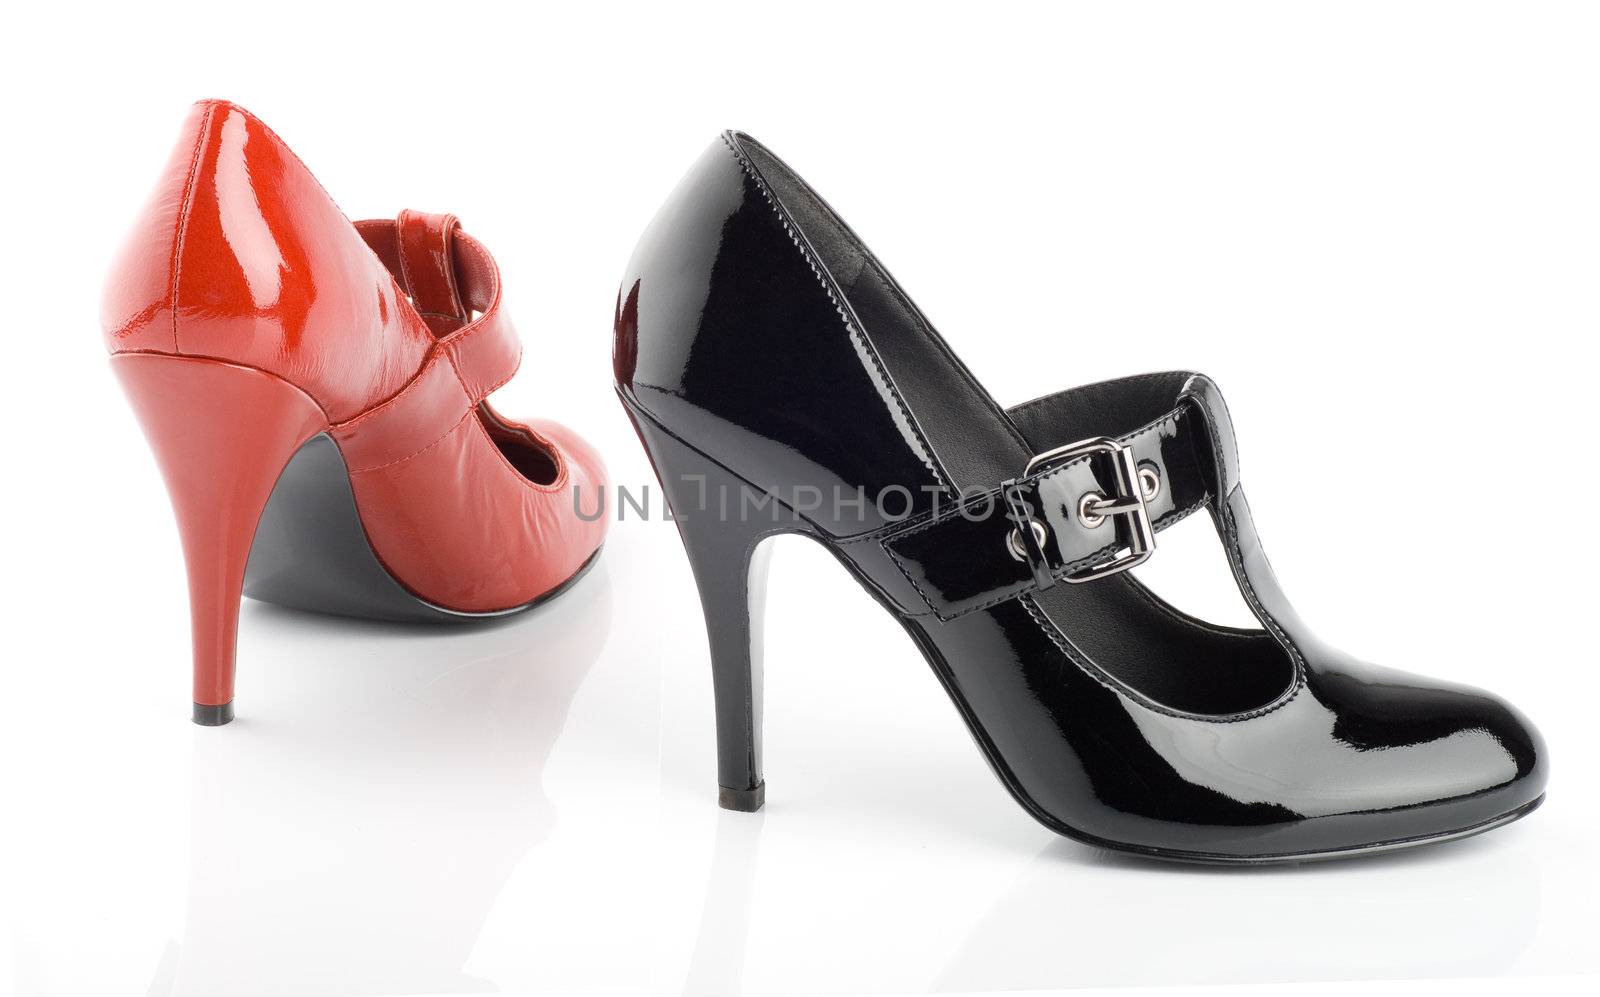 Woman shoes isolated on the white background

